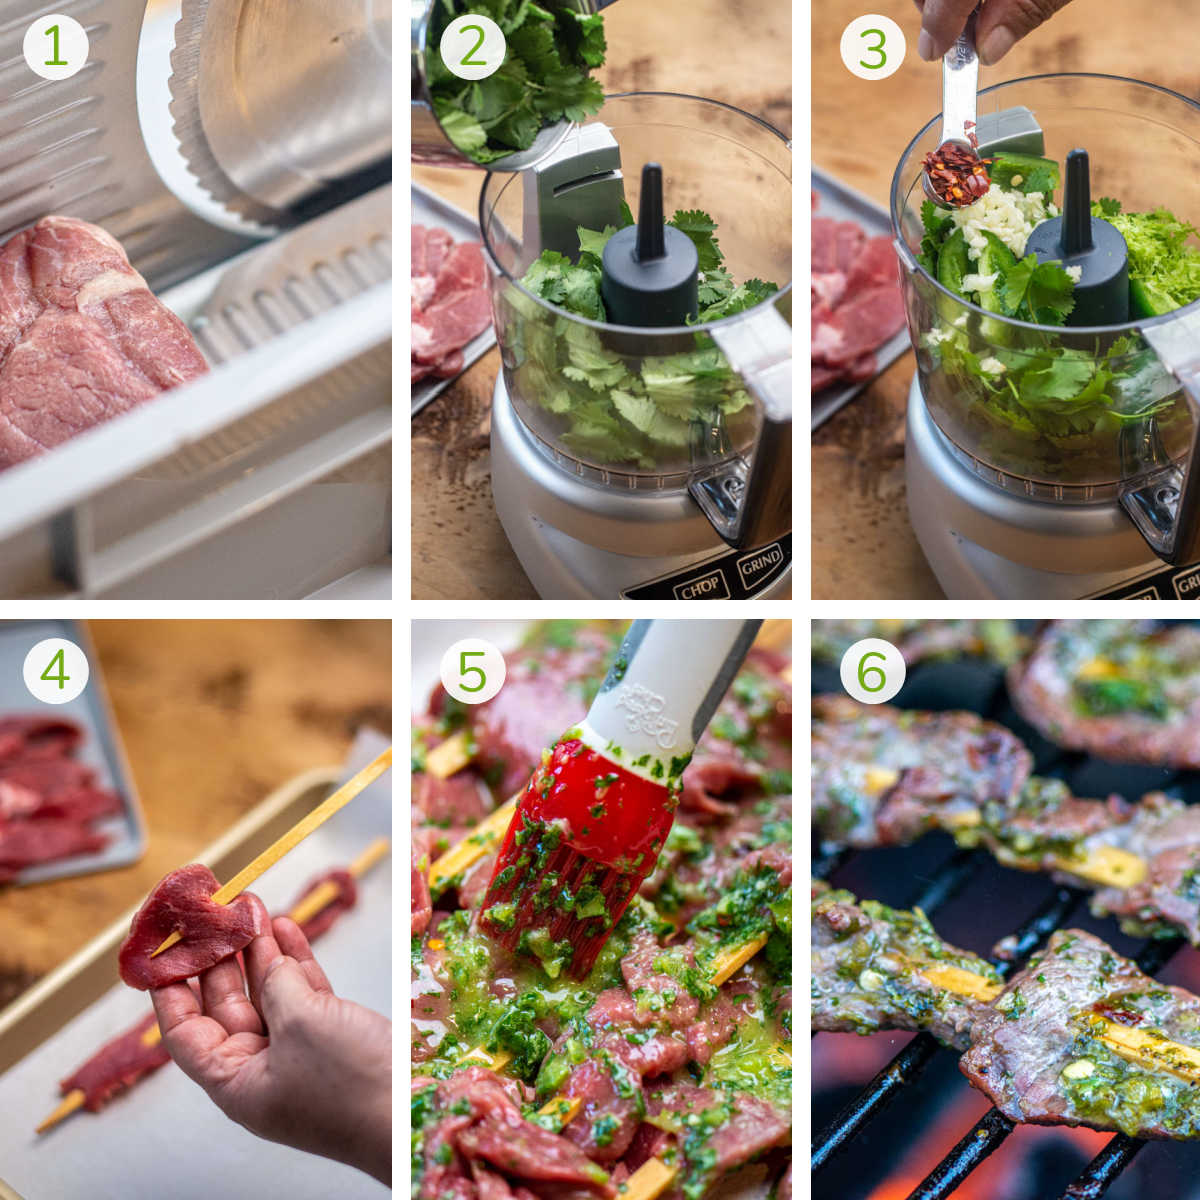 process photos showing slicing the steak, making the sauce, threading it on to the skewer and grilling.